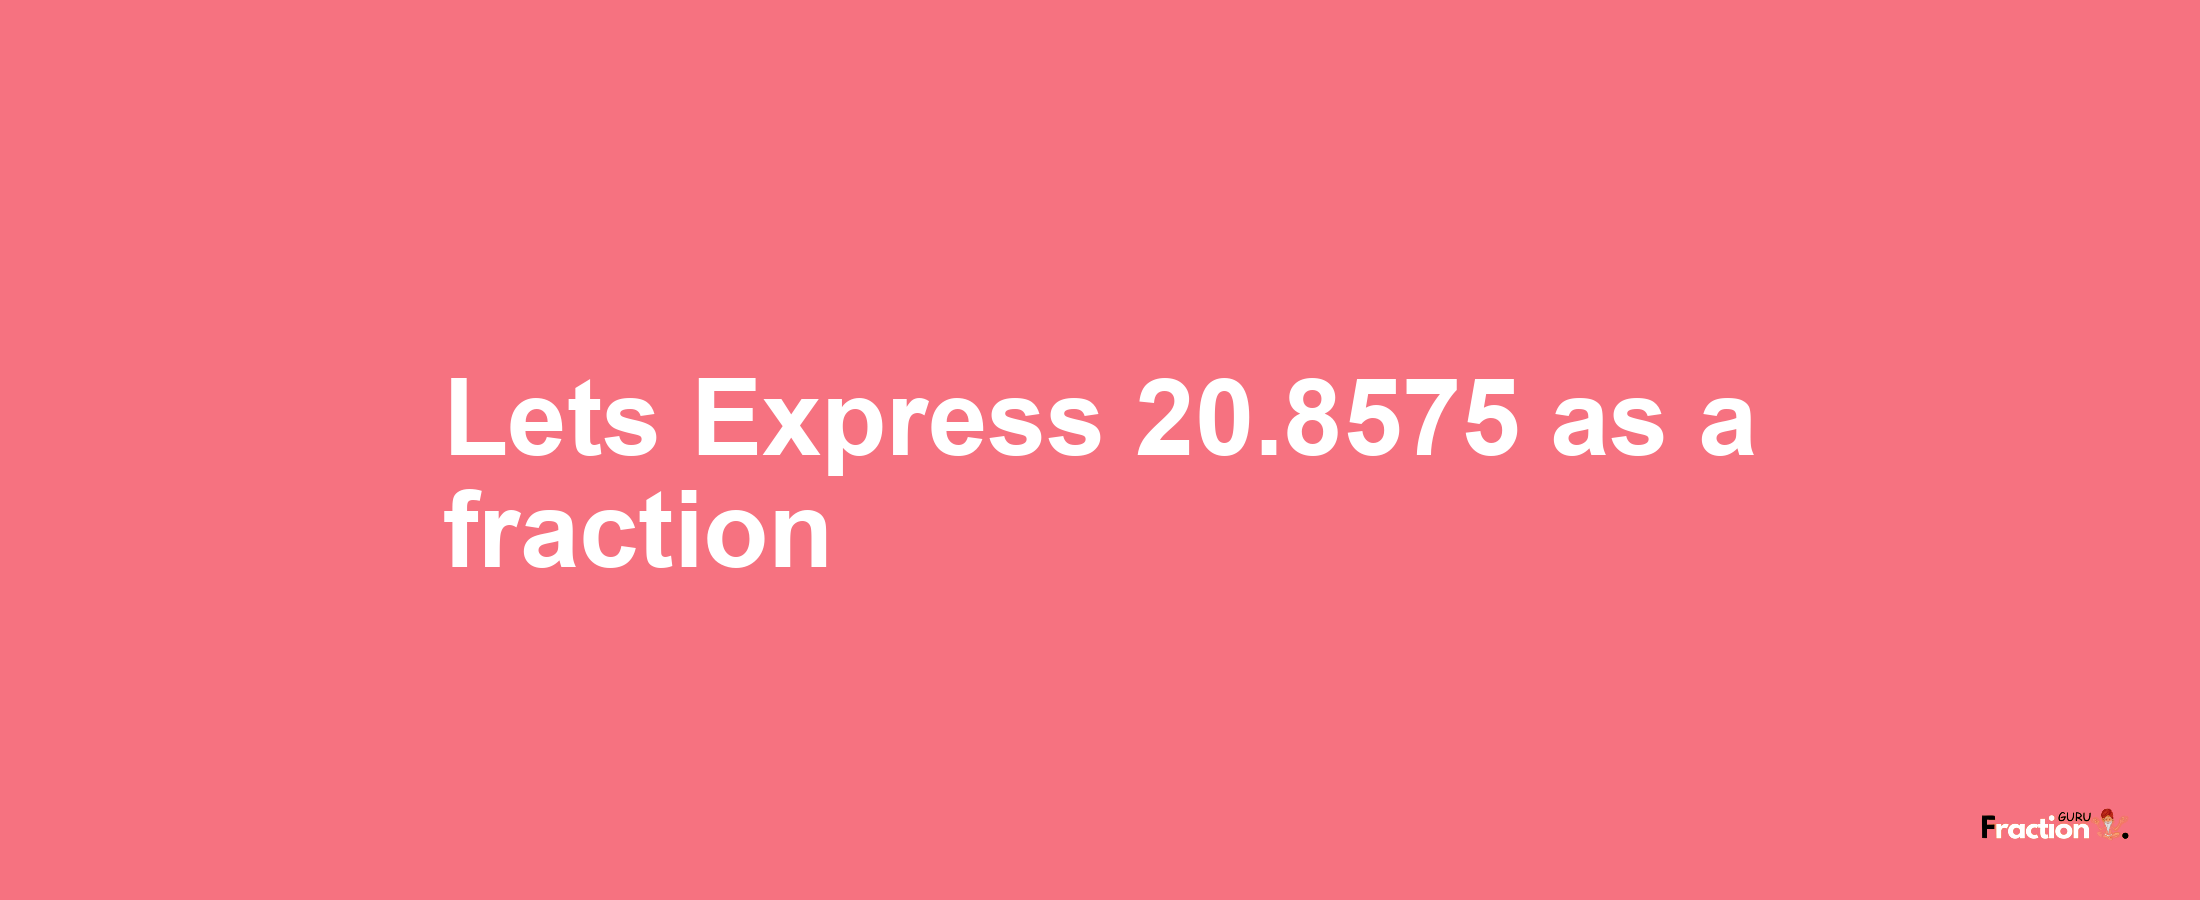 Lets Express 20.8575 as afraction